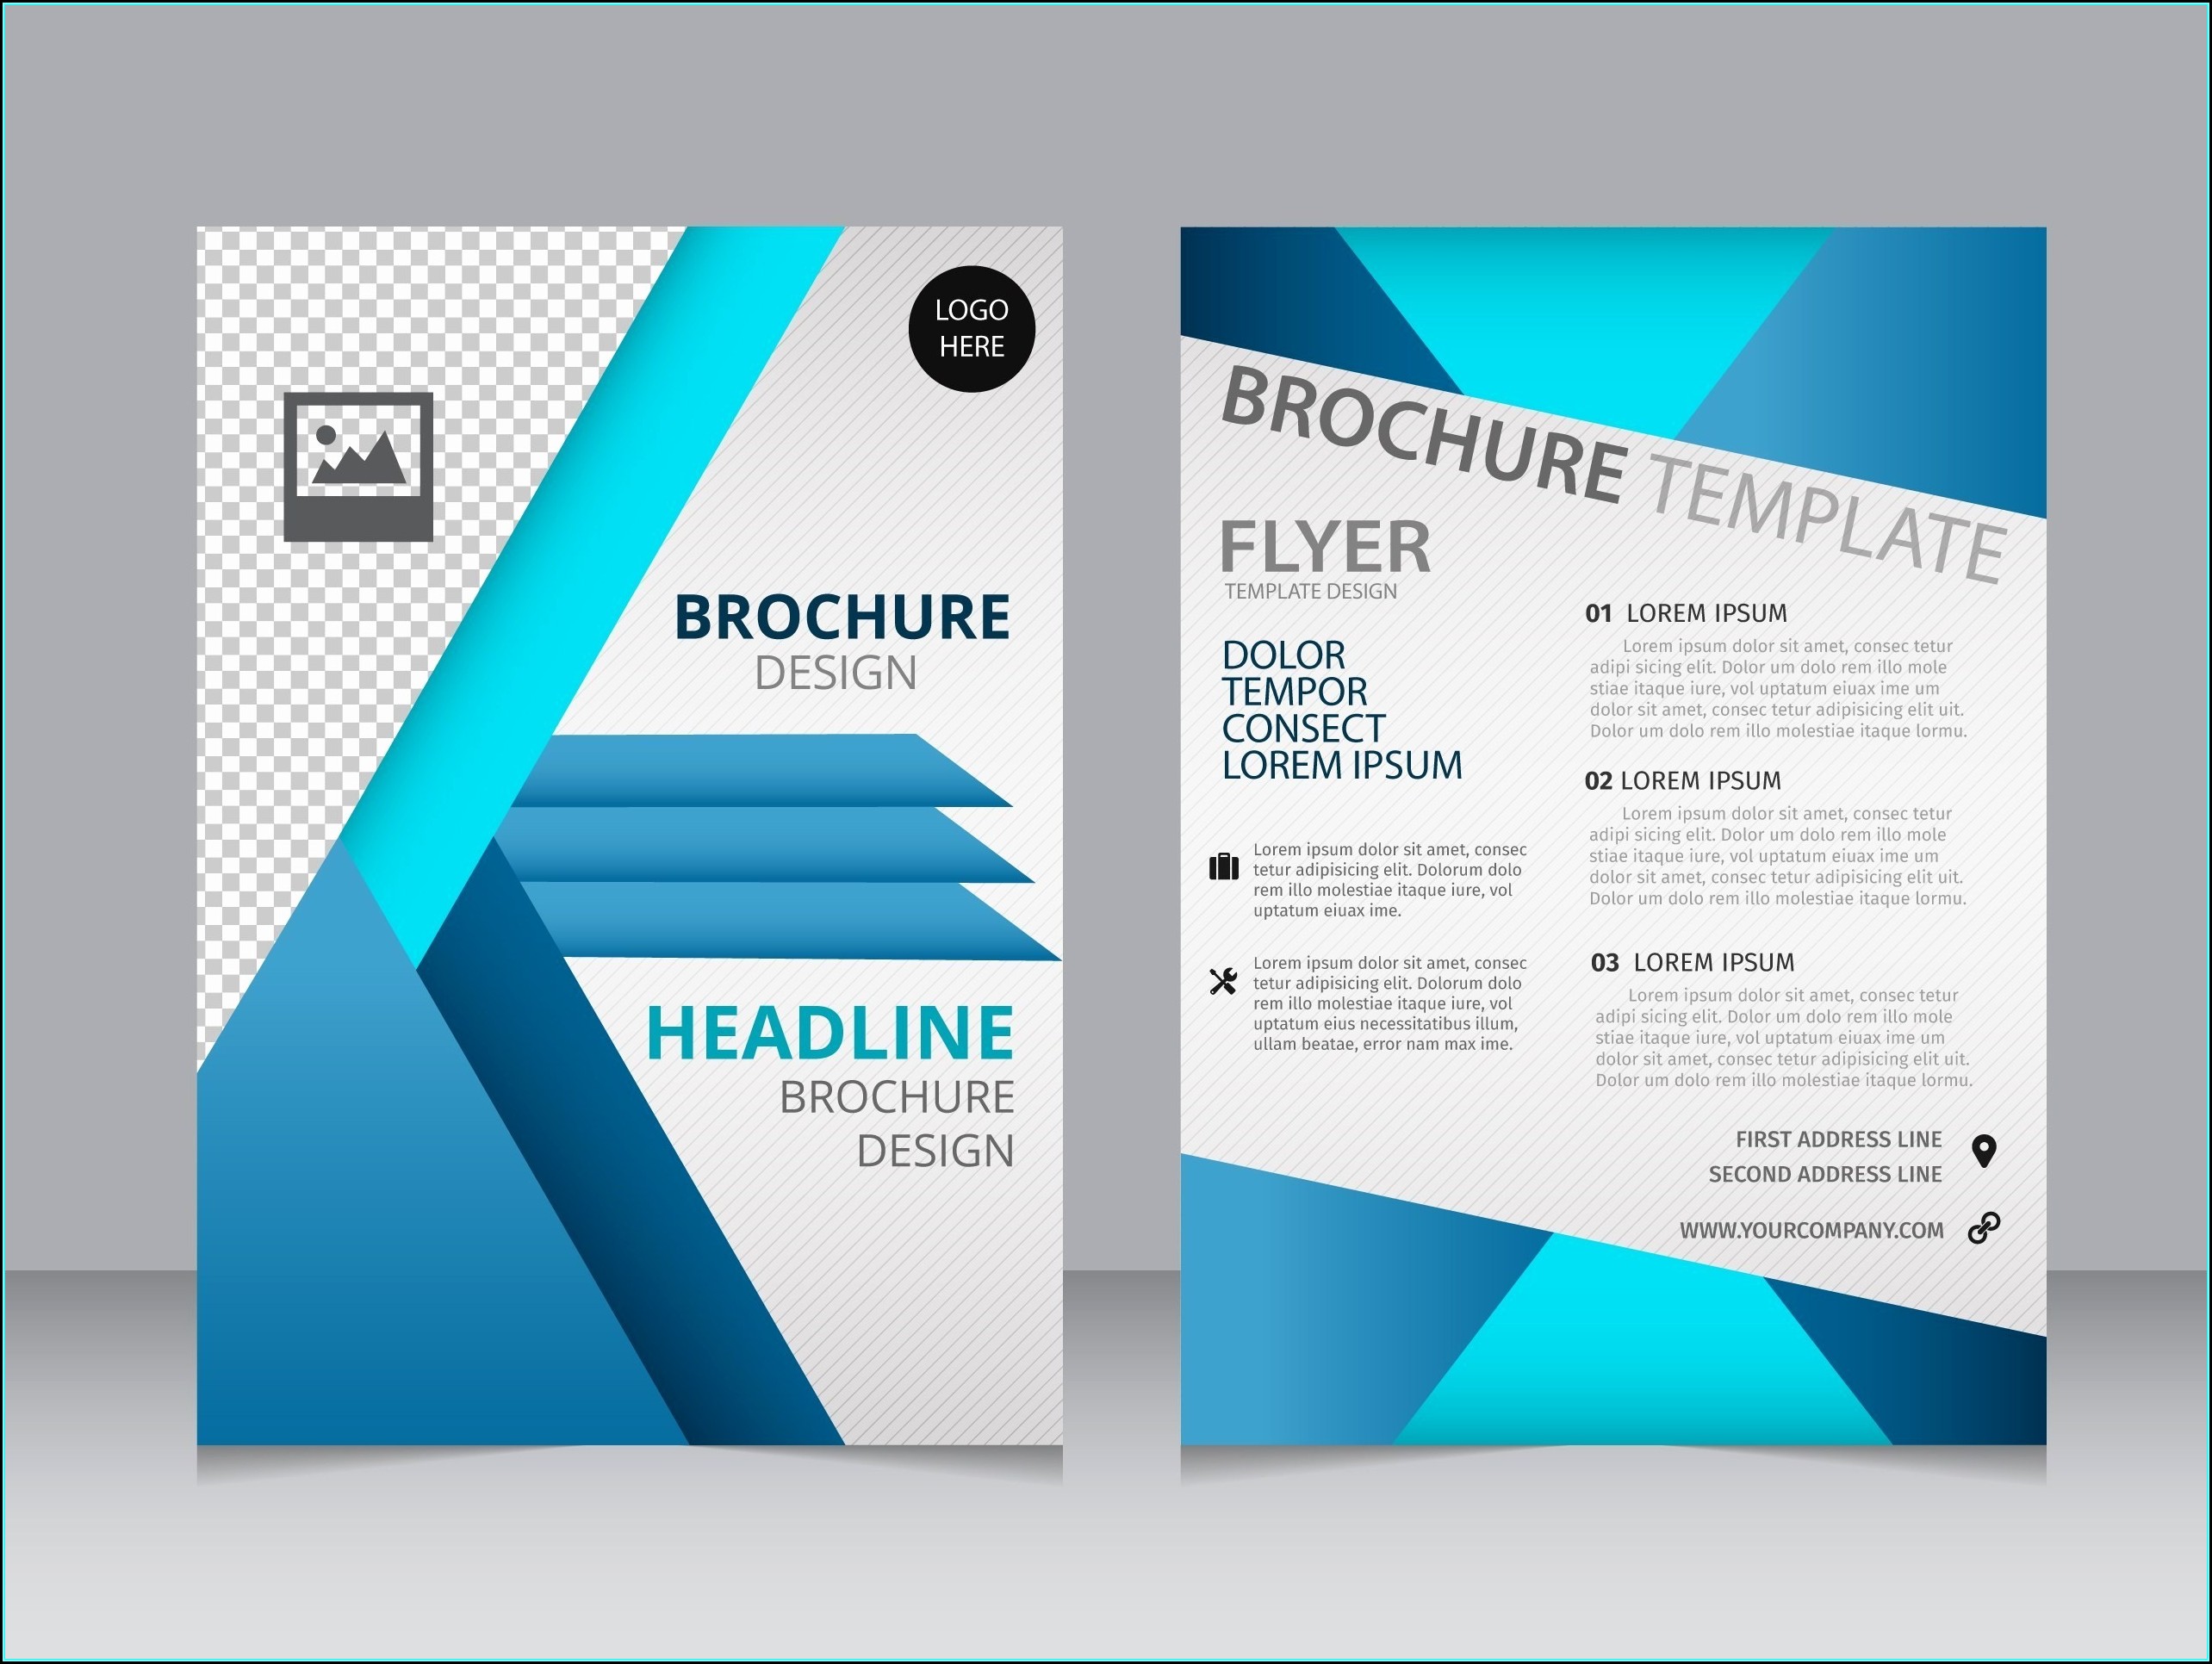 Free Download Product Brochure Templates